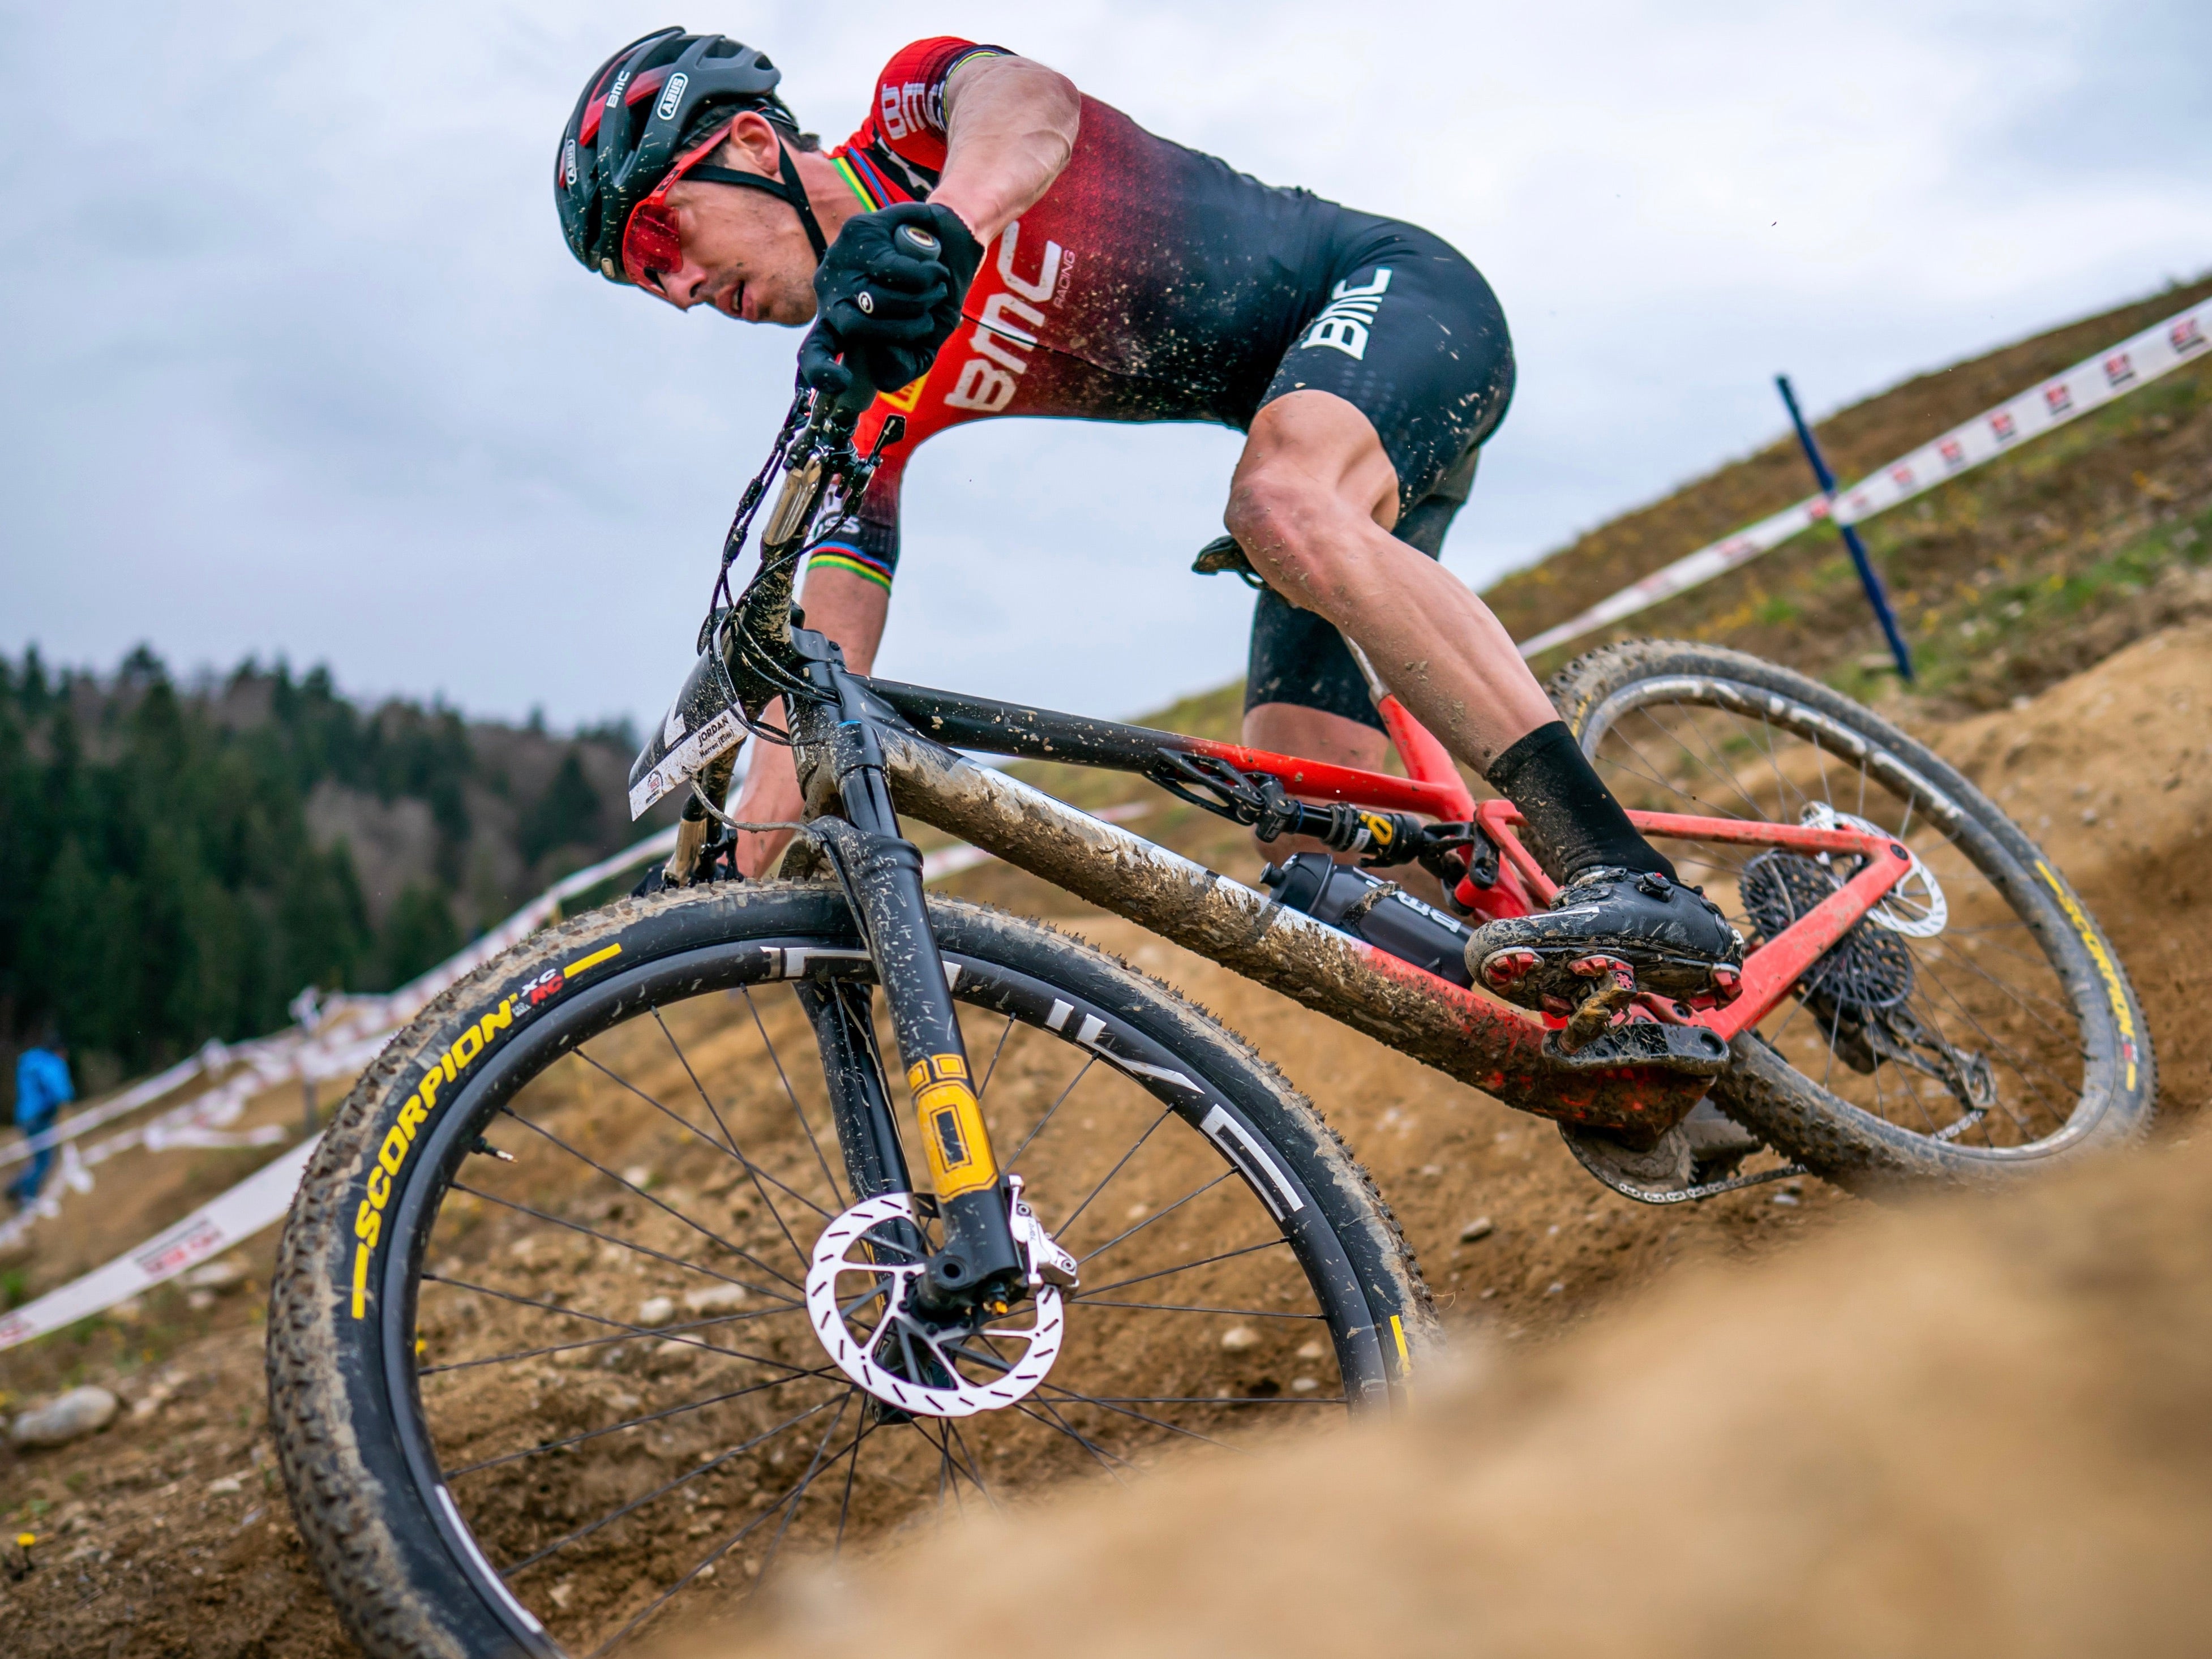 Öhlins’ suspension technology is a game changer for Team BMC